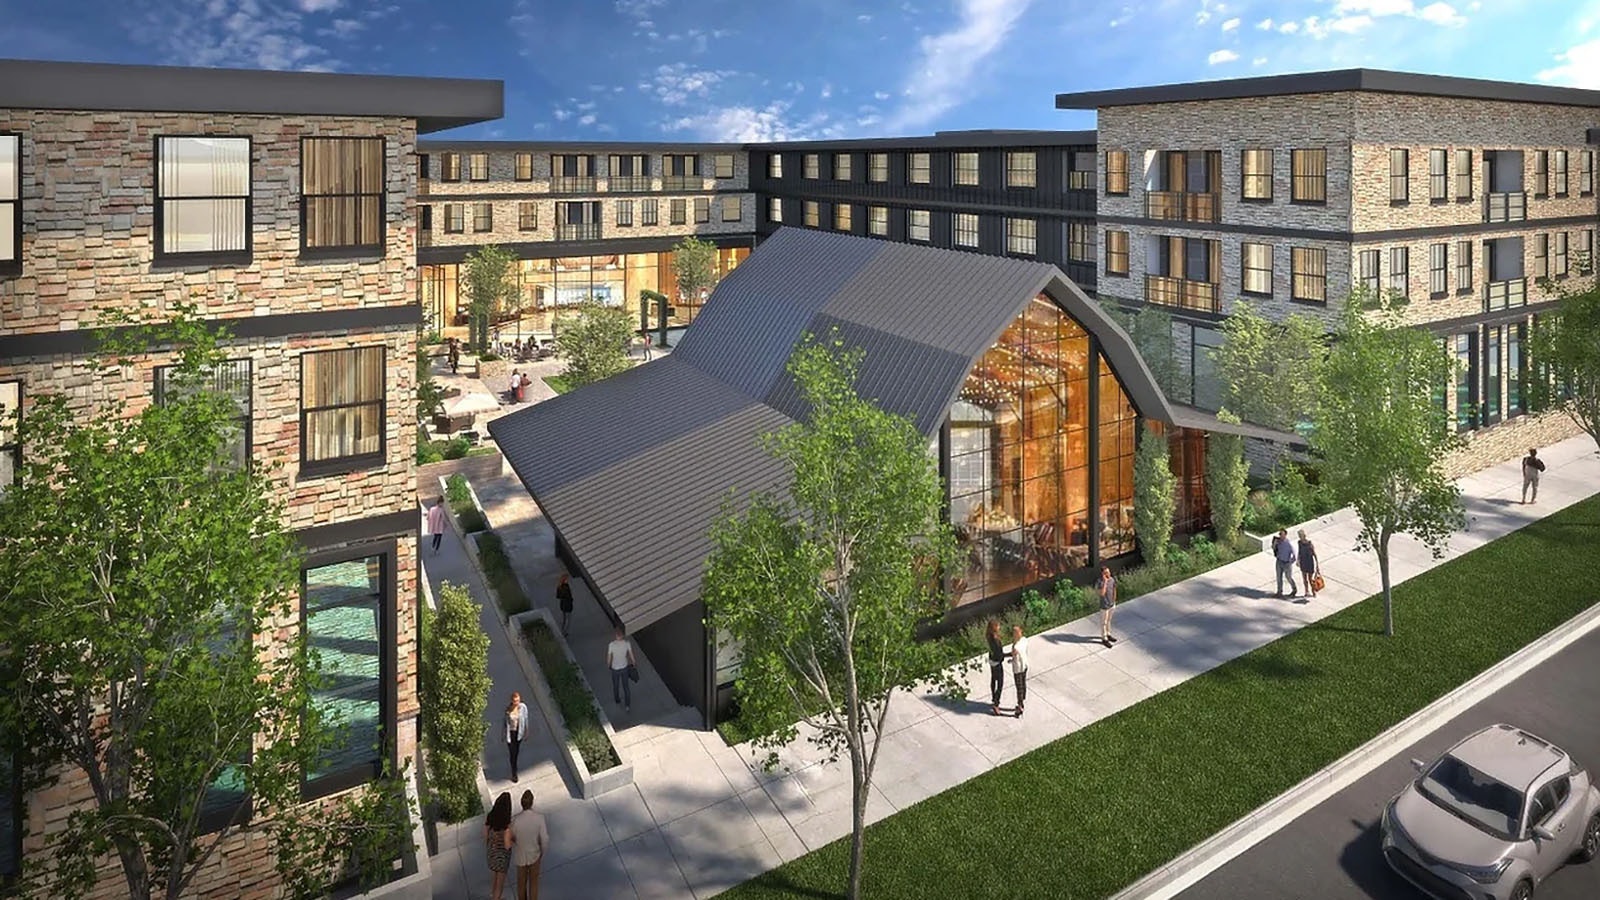 An illustration of the massive hotel development Mogul Capital has proposed for downtown Jackson, Wyoming.